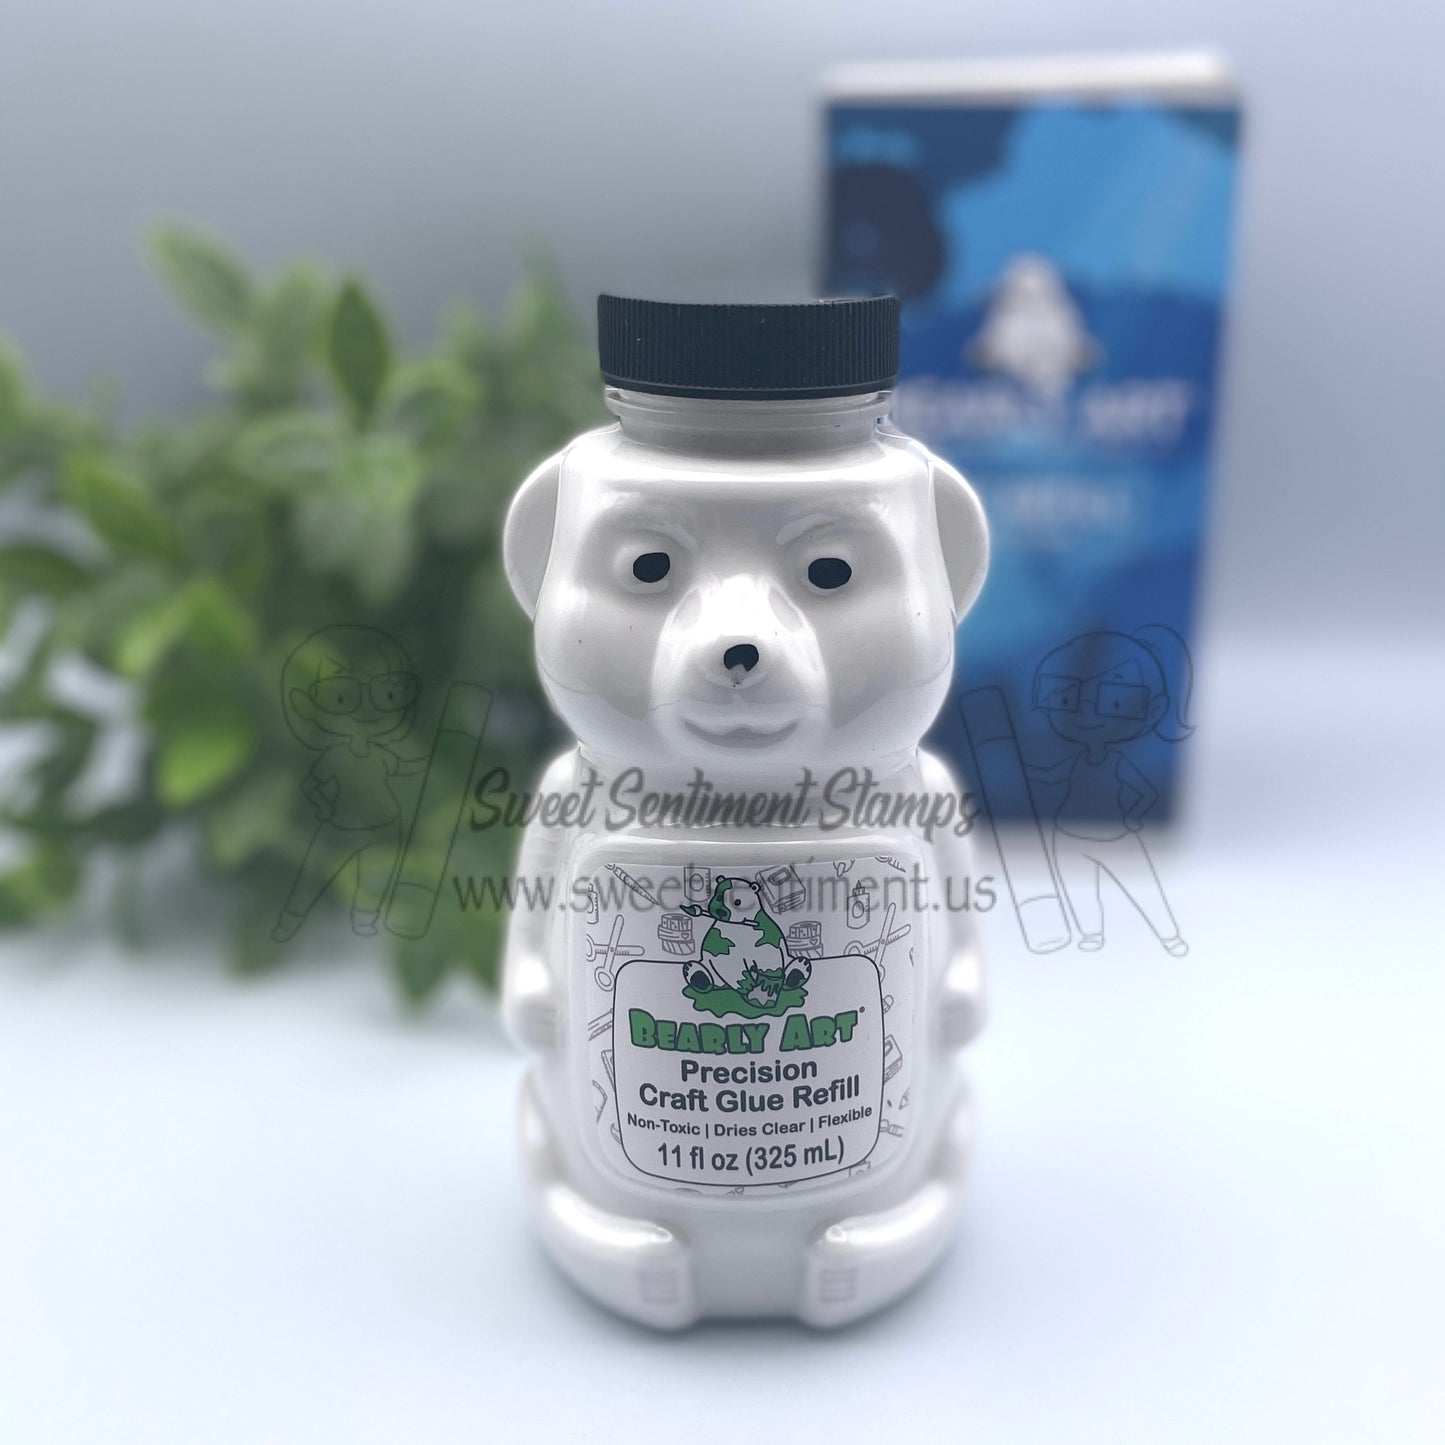 Bearly Art Precision Craft Glue - THE ORIGINAL – Sweet Sentiment Stamps